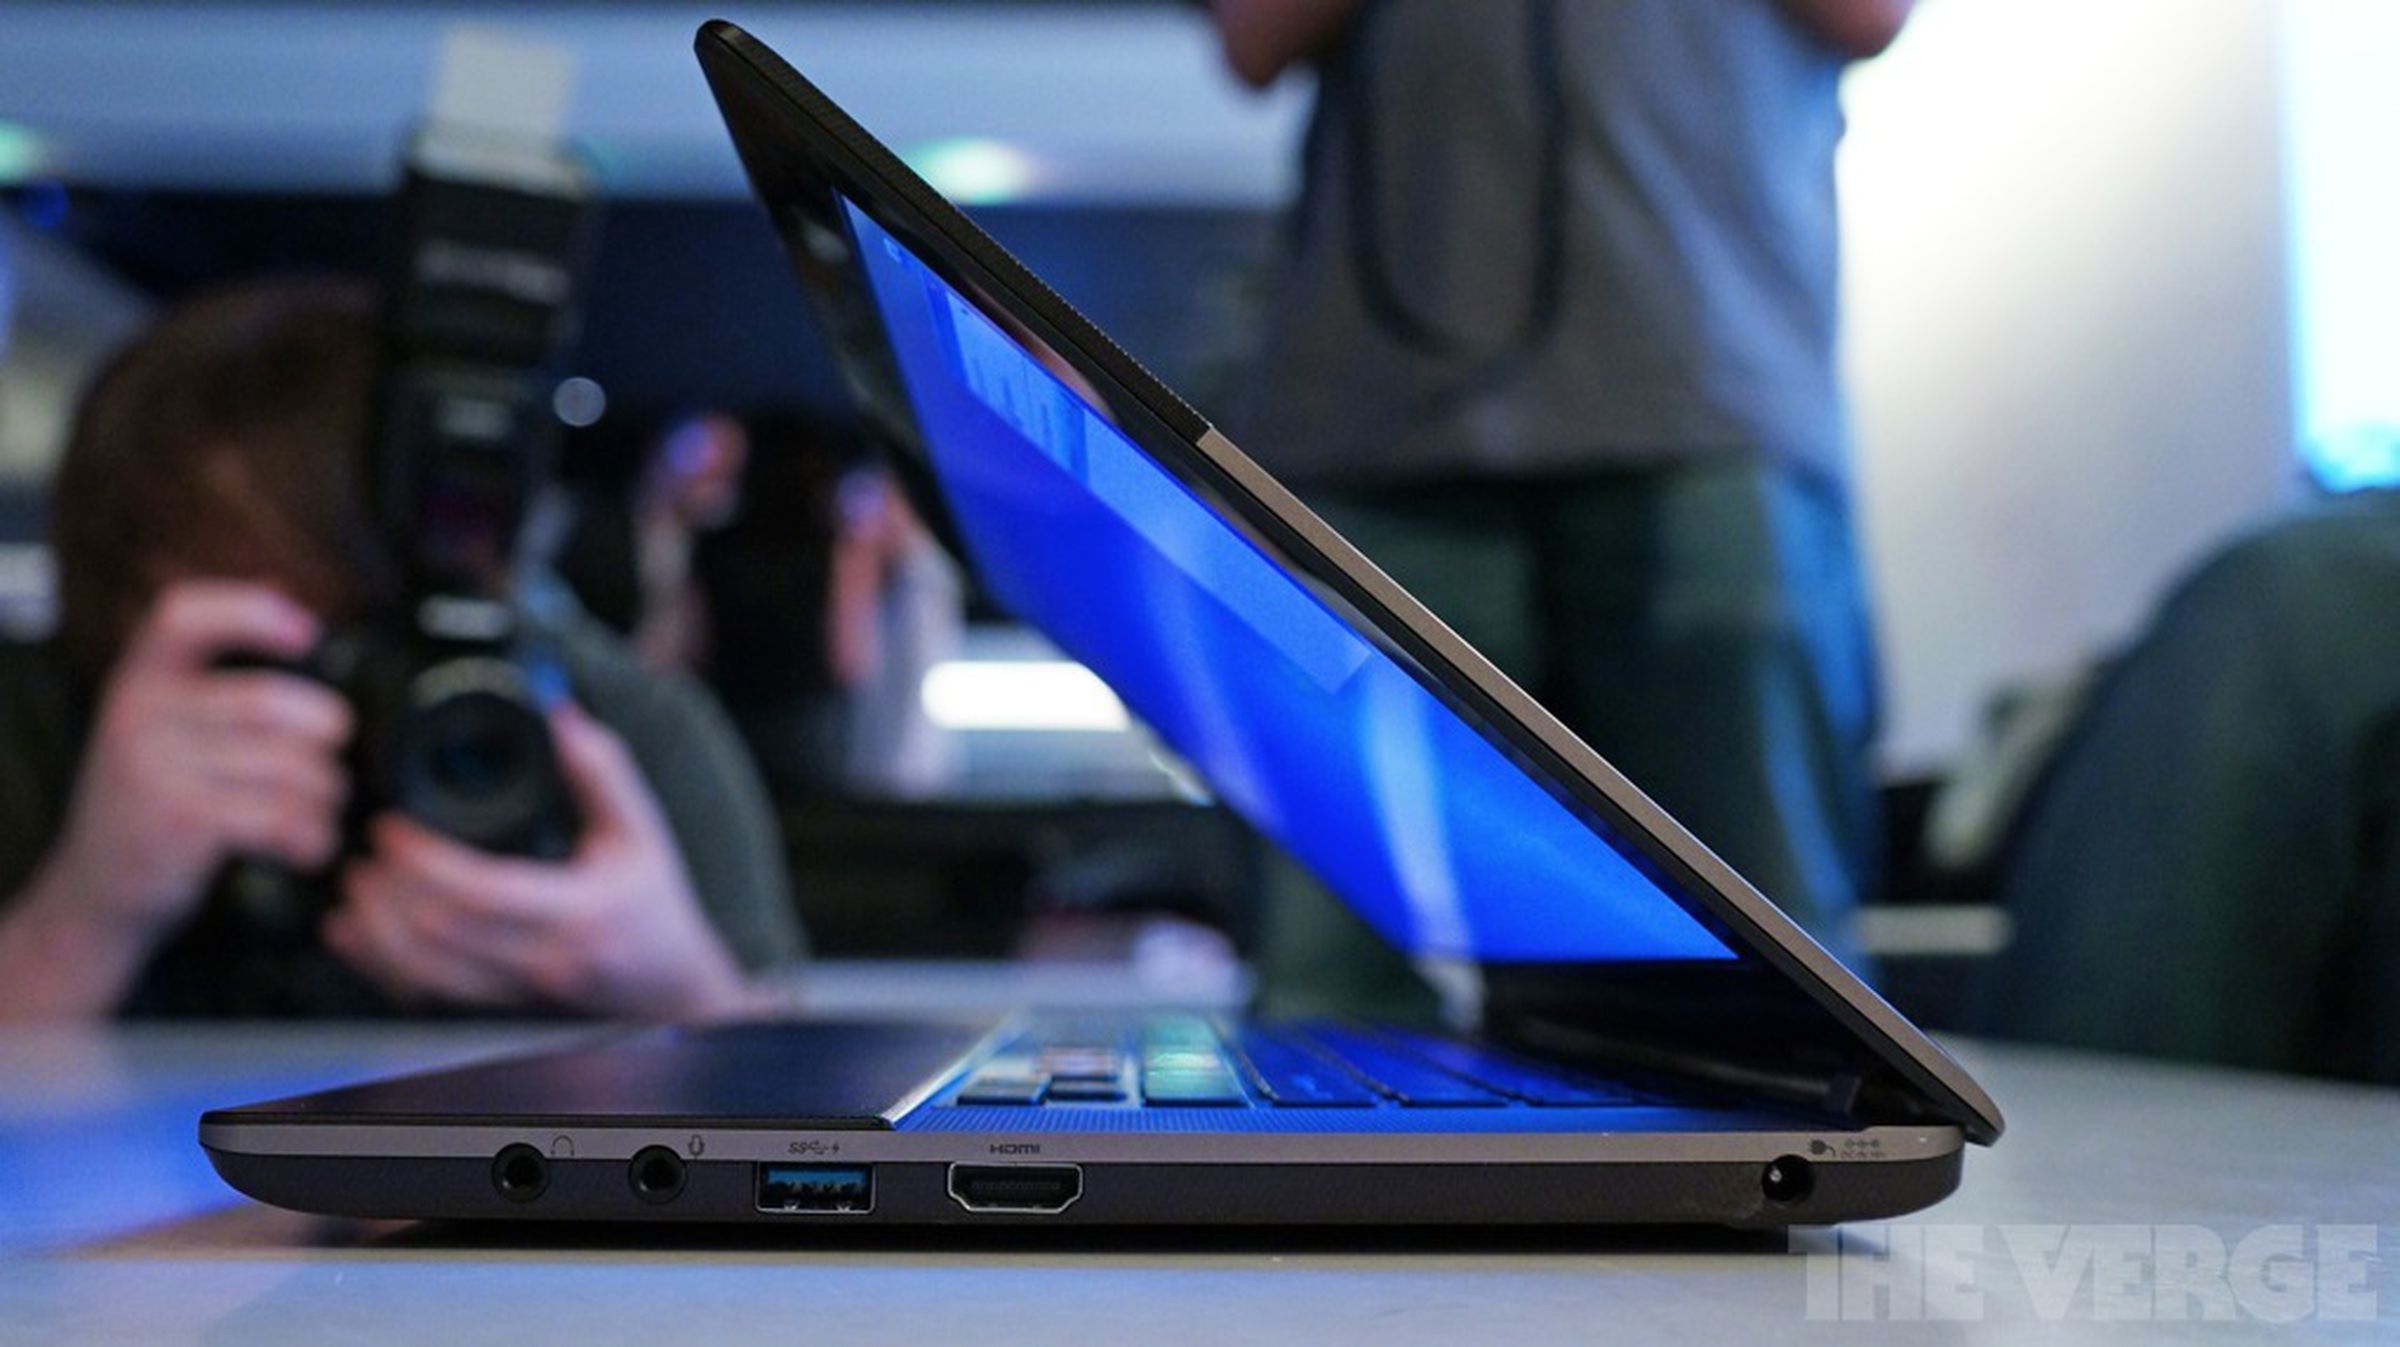 Toshiba Satellite U840W hands-on pictures